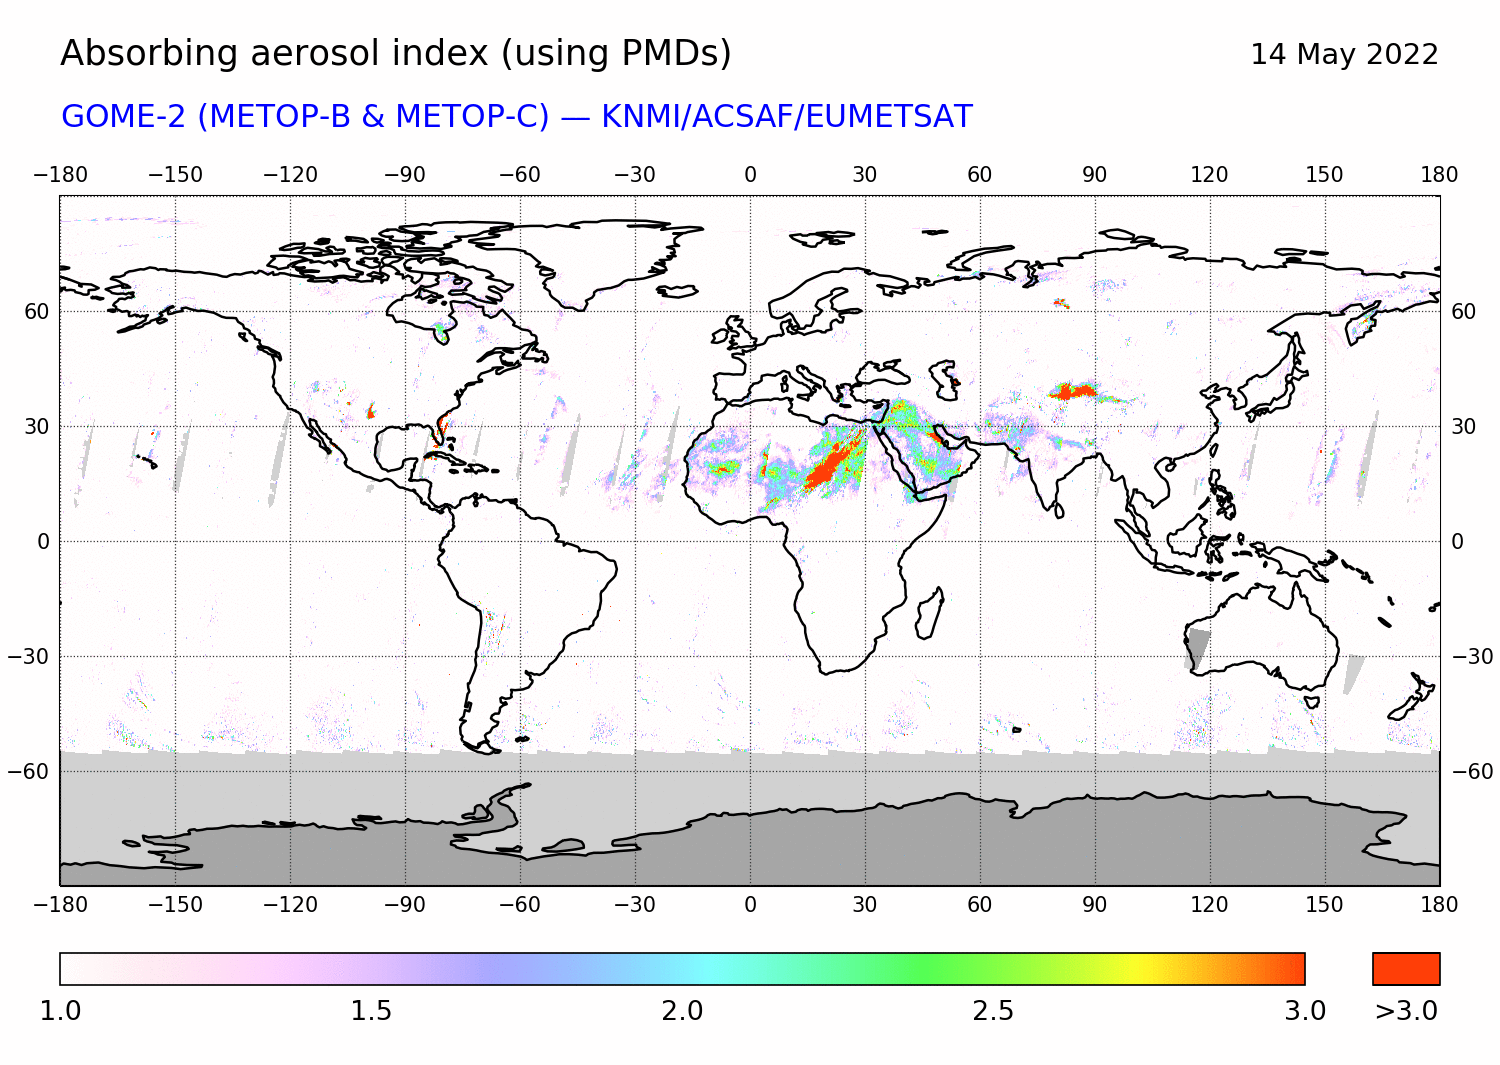 GOME-2 - Absorbing aerosol index of 14 May 2022